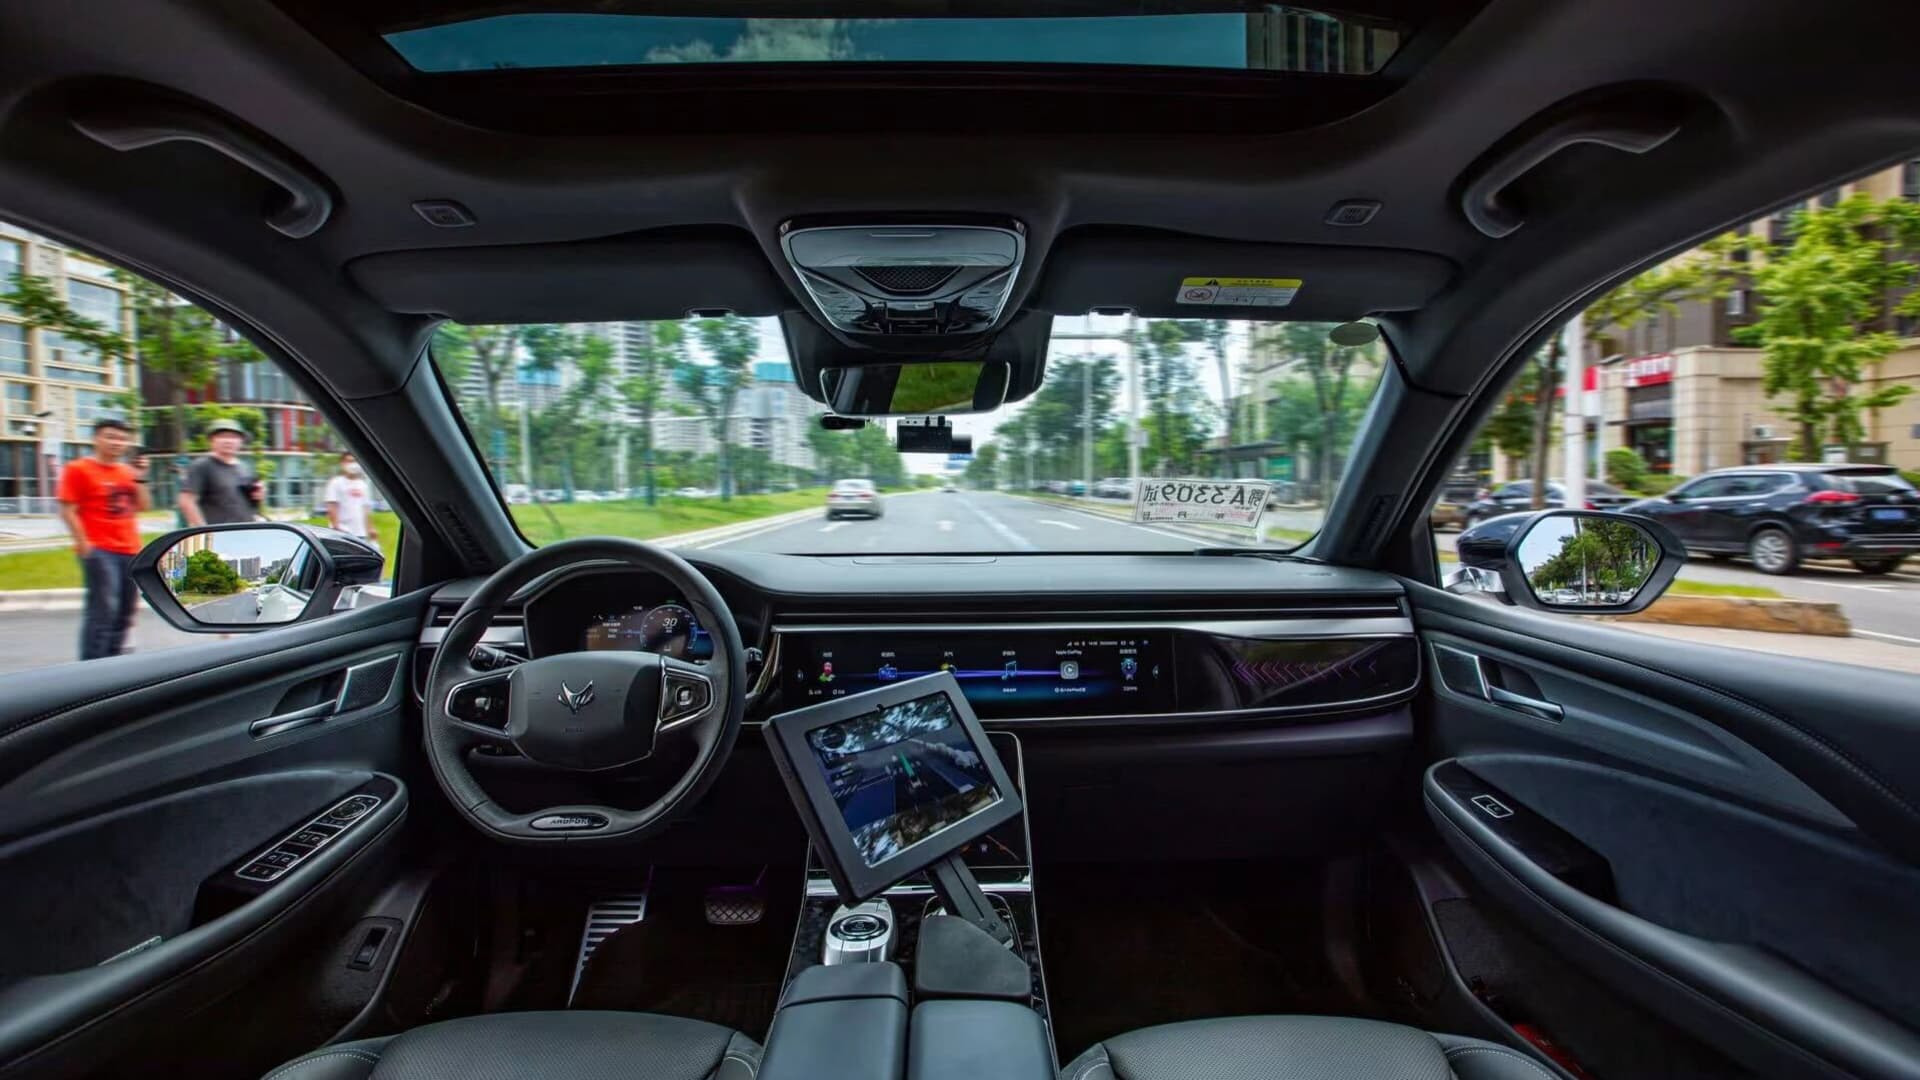 China’s capital city is letting the public take fully driverless robotaxis — and has bigger rollout plans, startup Pony.ai says